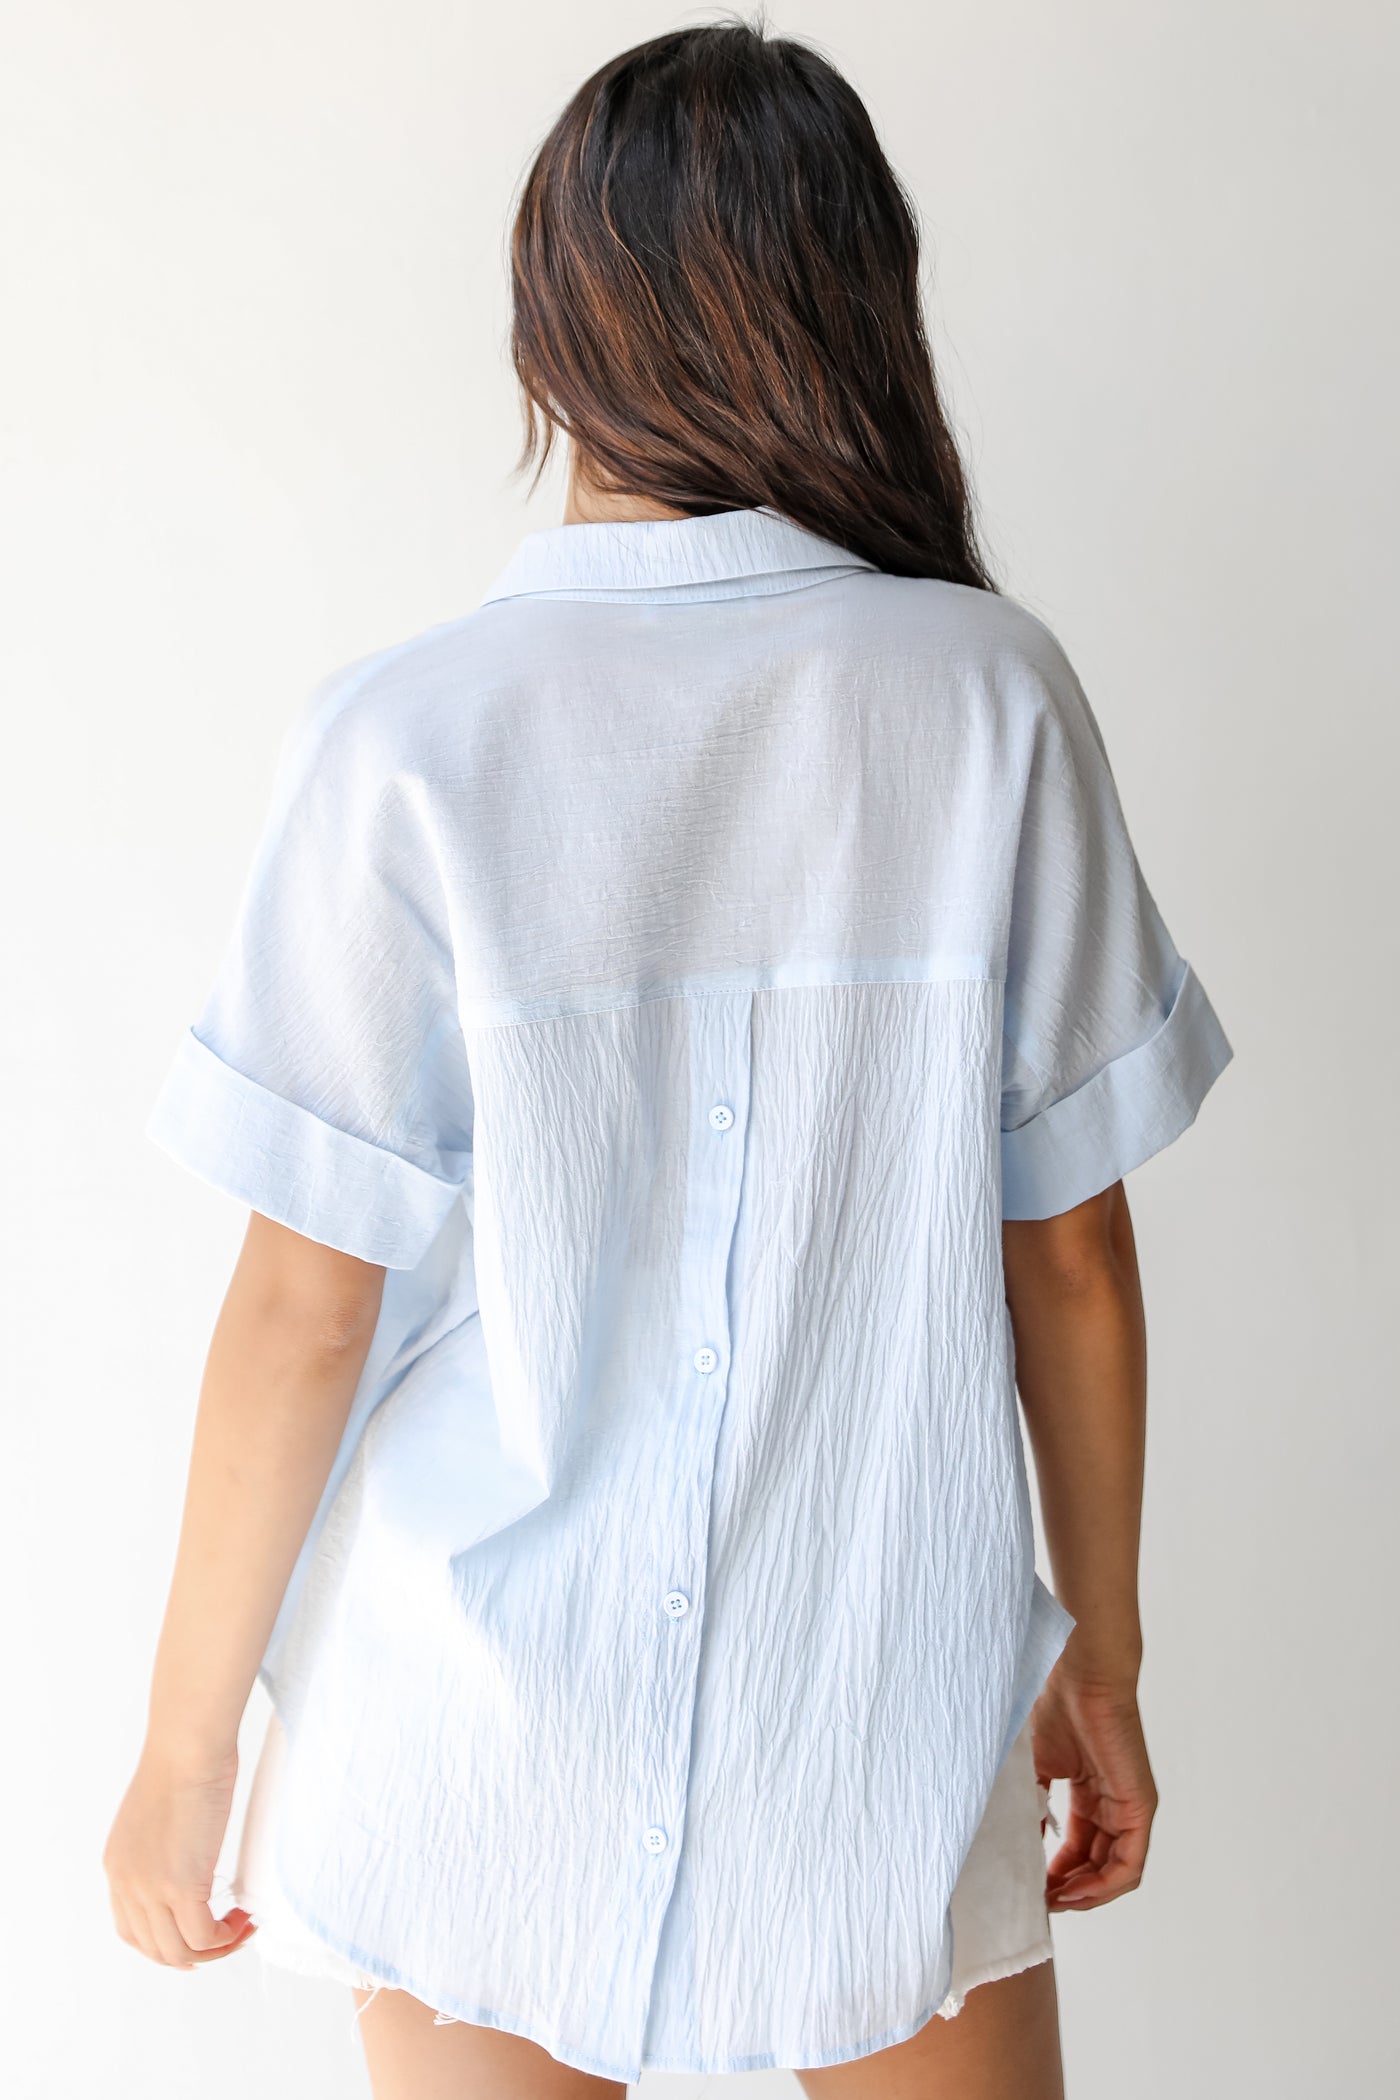 Linen Blouse in blue back view